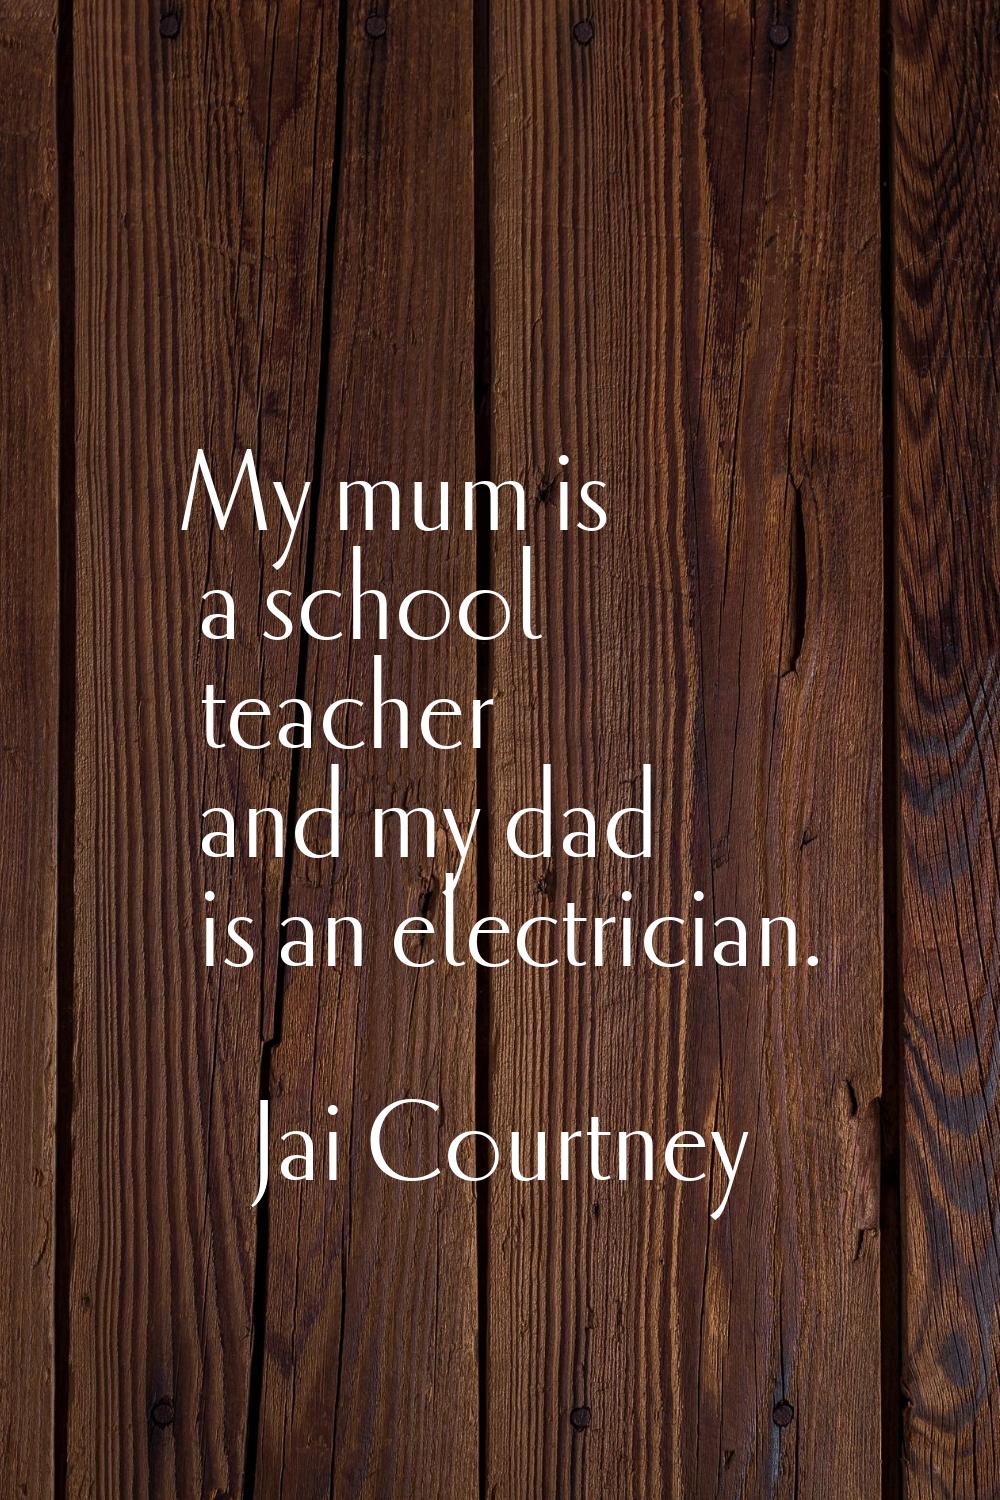 My mum is a school teacher and my dad is an electrician.